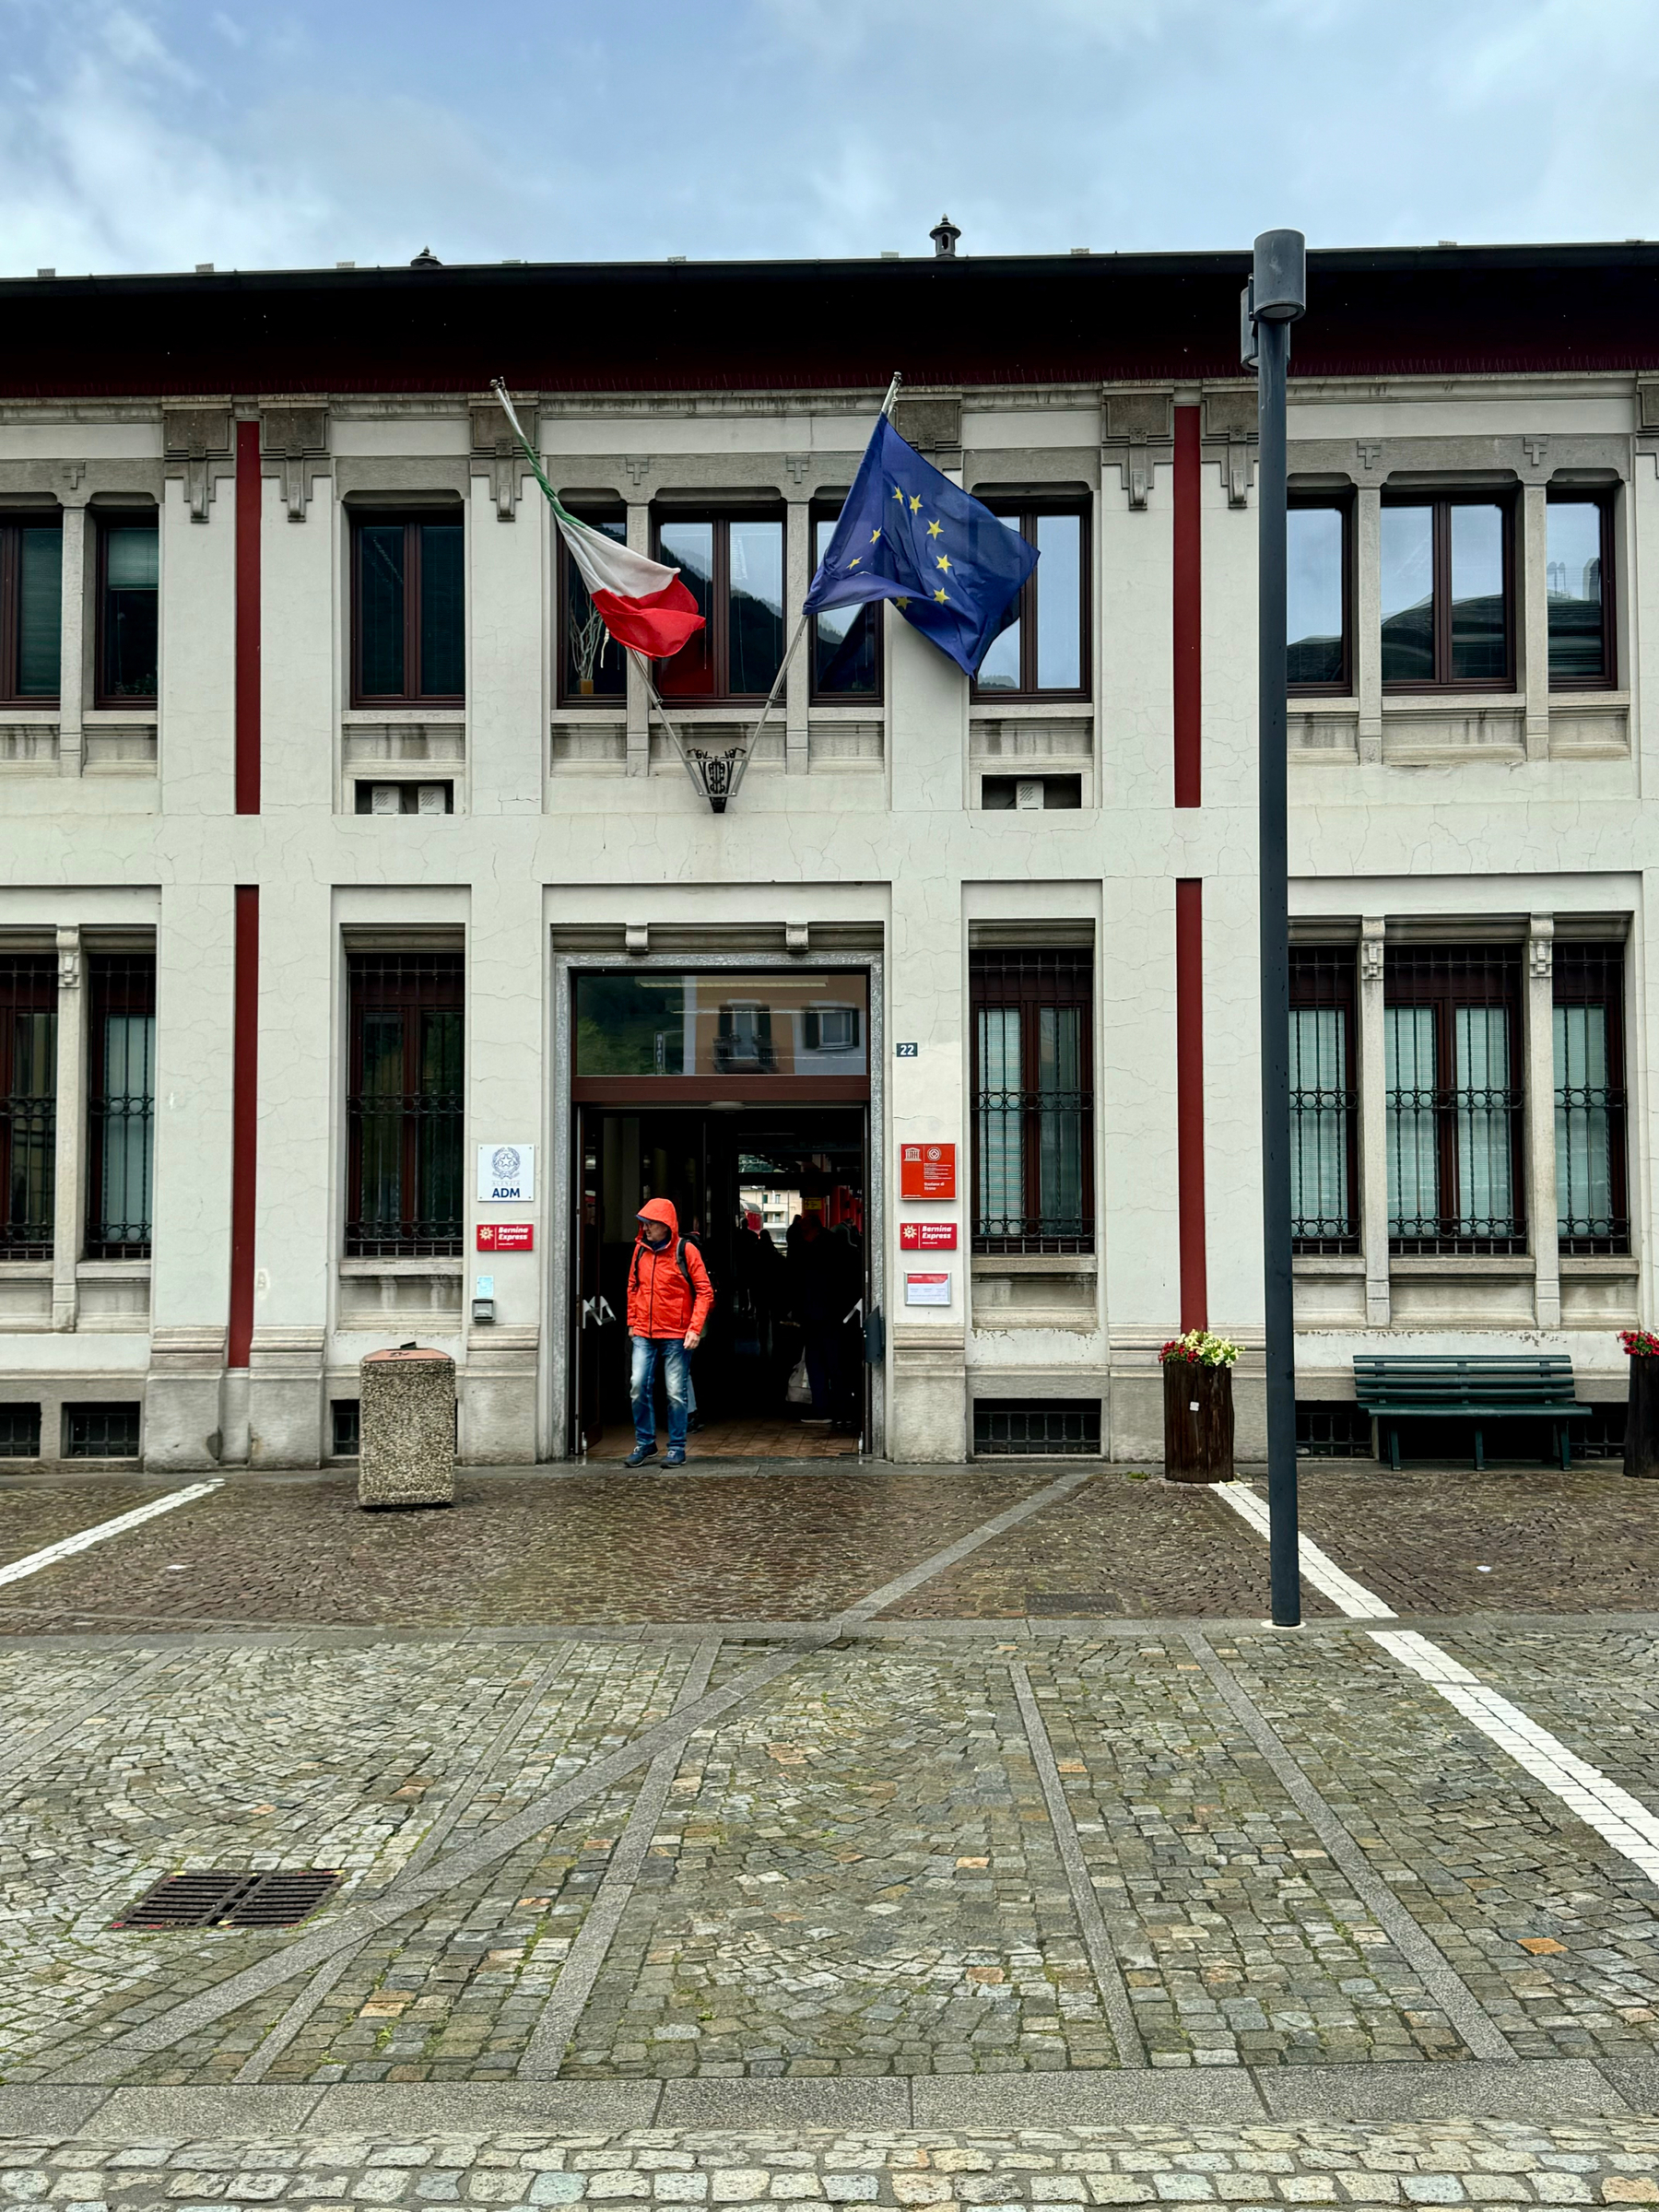 A person in an orange jacket standing at the entrance of a building adorned with Italian and European Union flags. The building has a white facade with red vertical accents and multiple windows. The ground is paved with cobblestones.